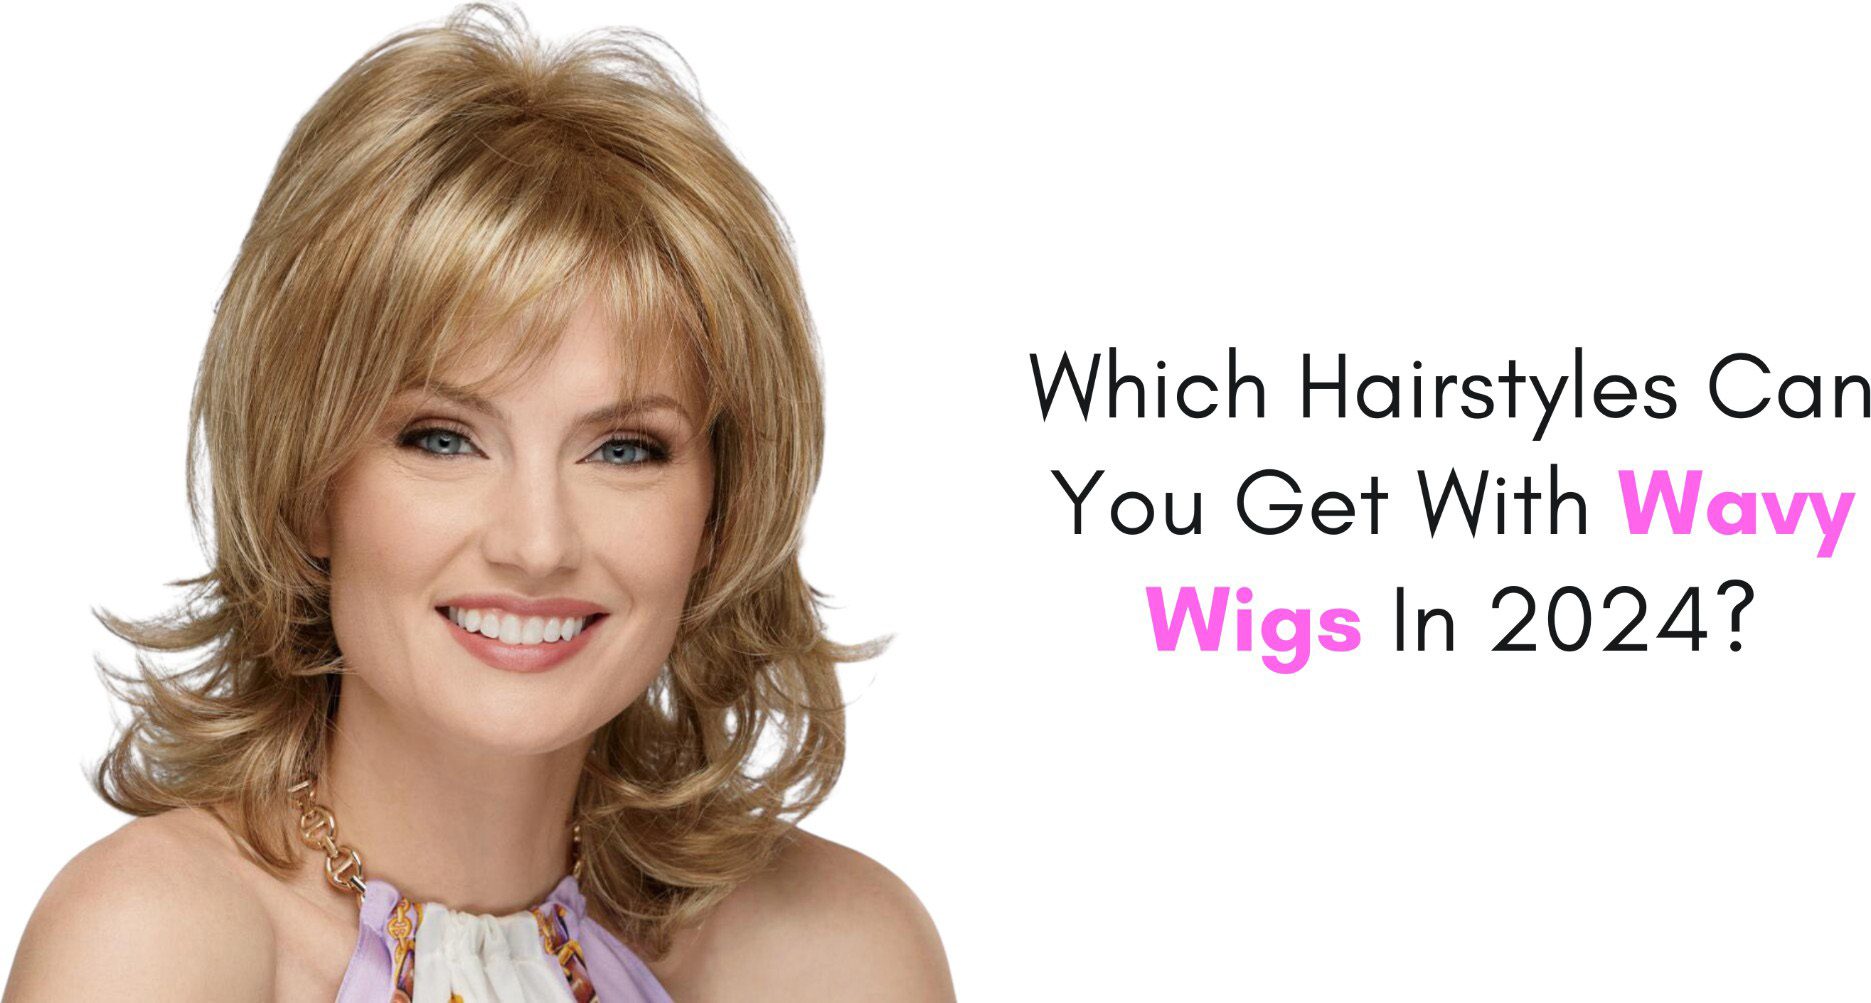 Which Hairstyles Can You Get With Wavy Wigs In 2024?